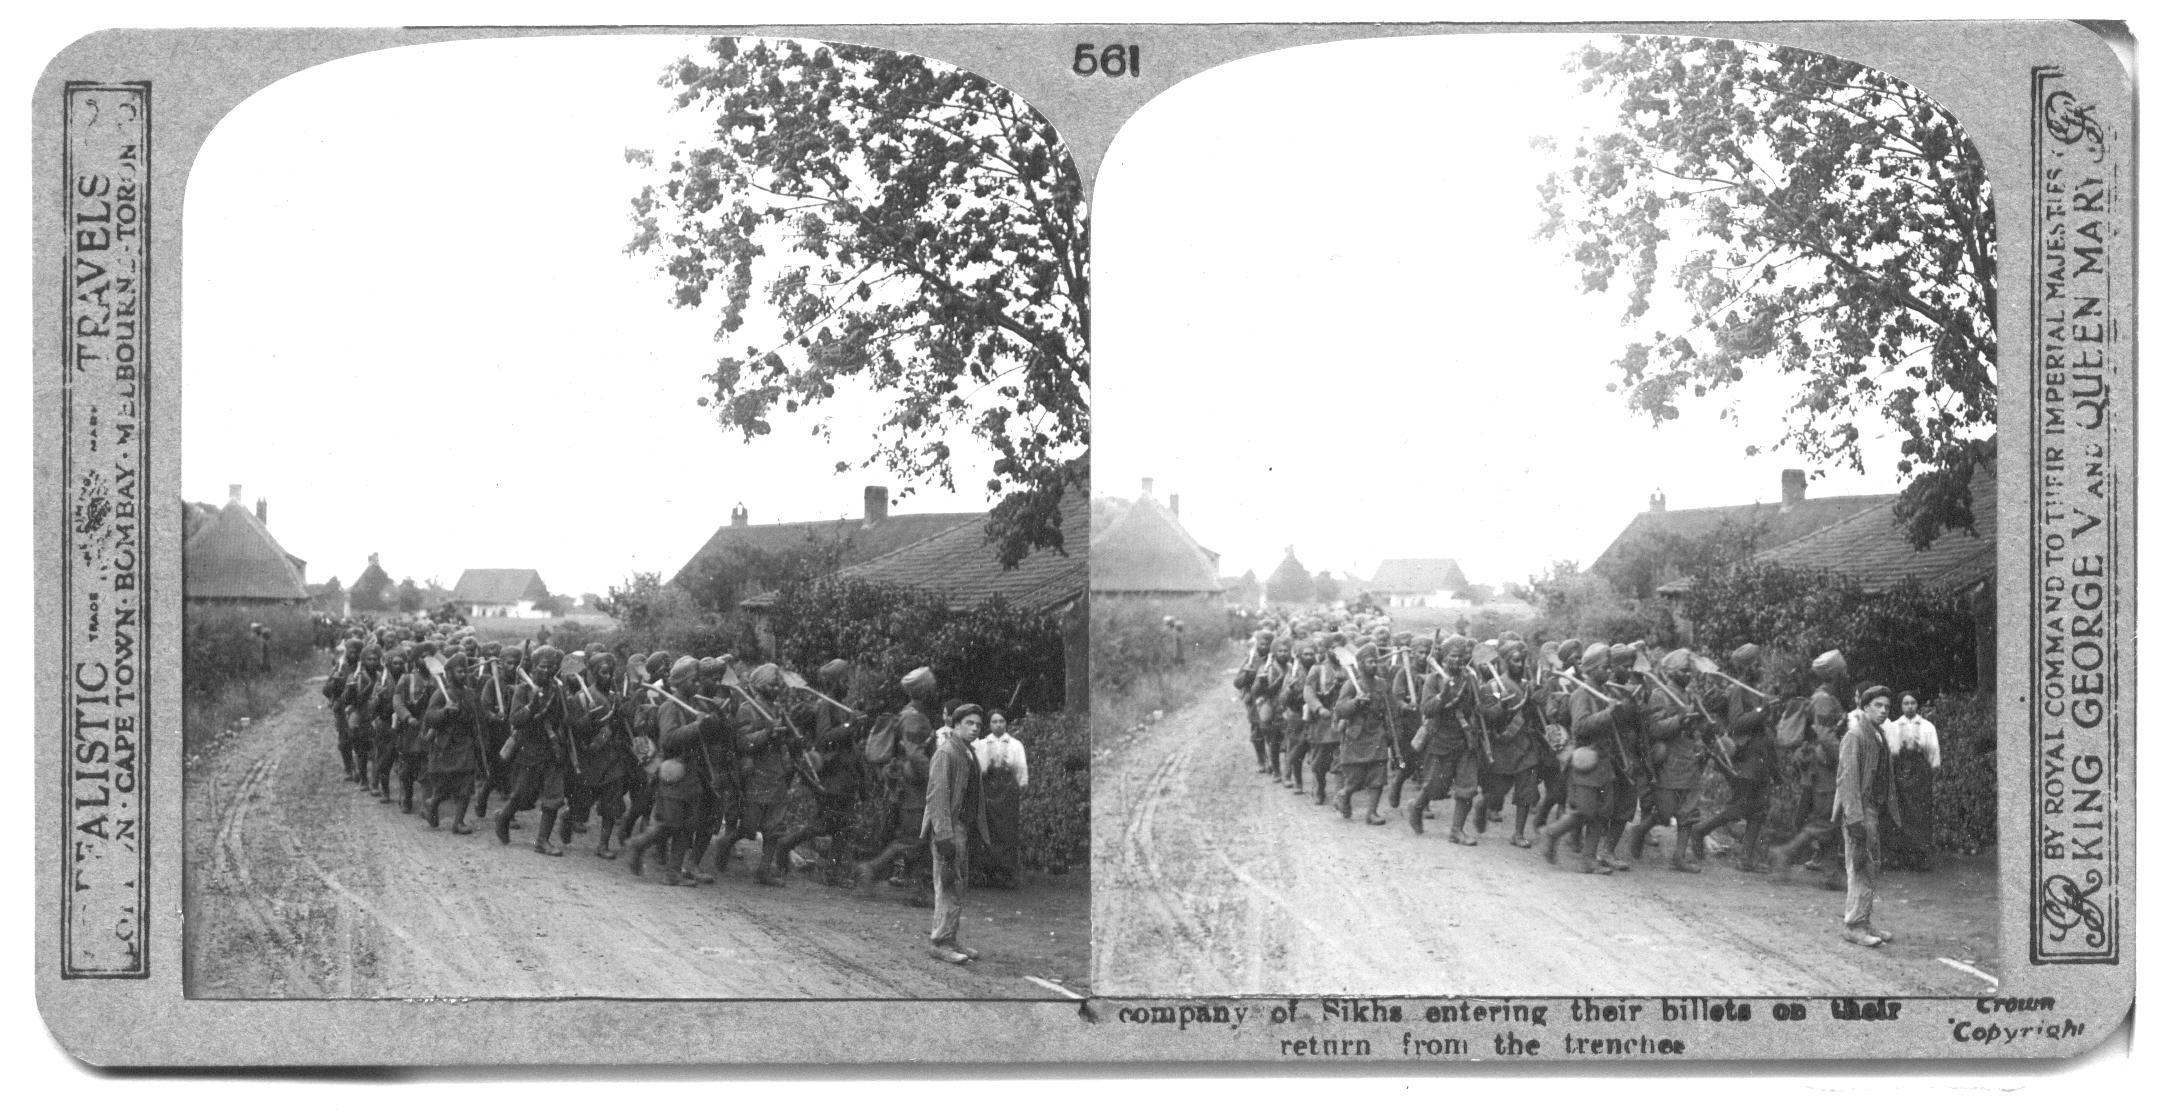 A company of Sikhs entering their billets on their return from the trenches